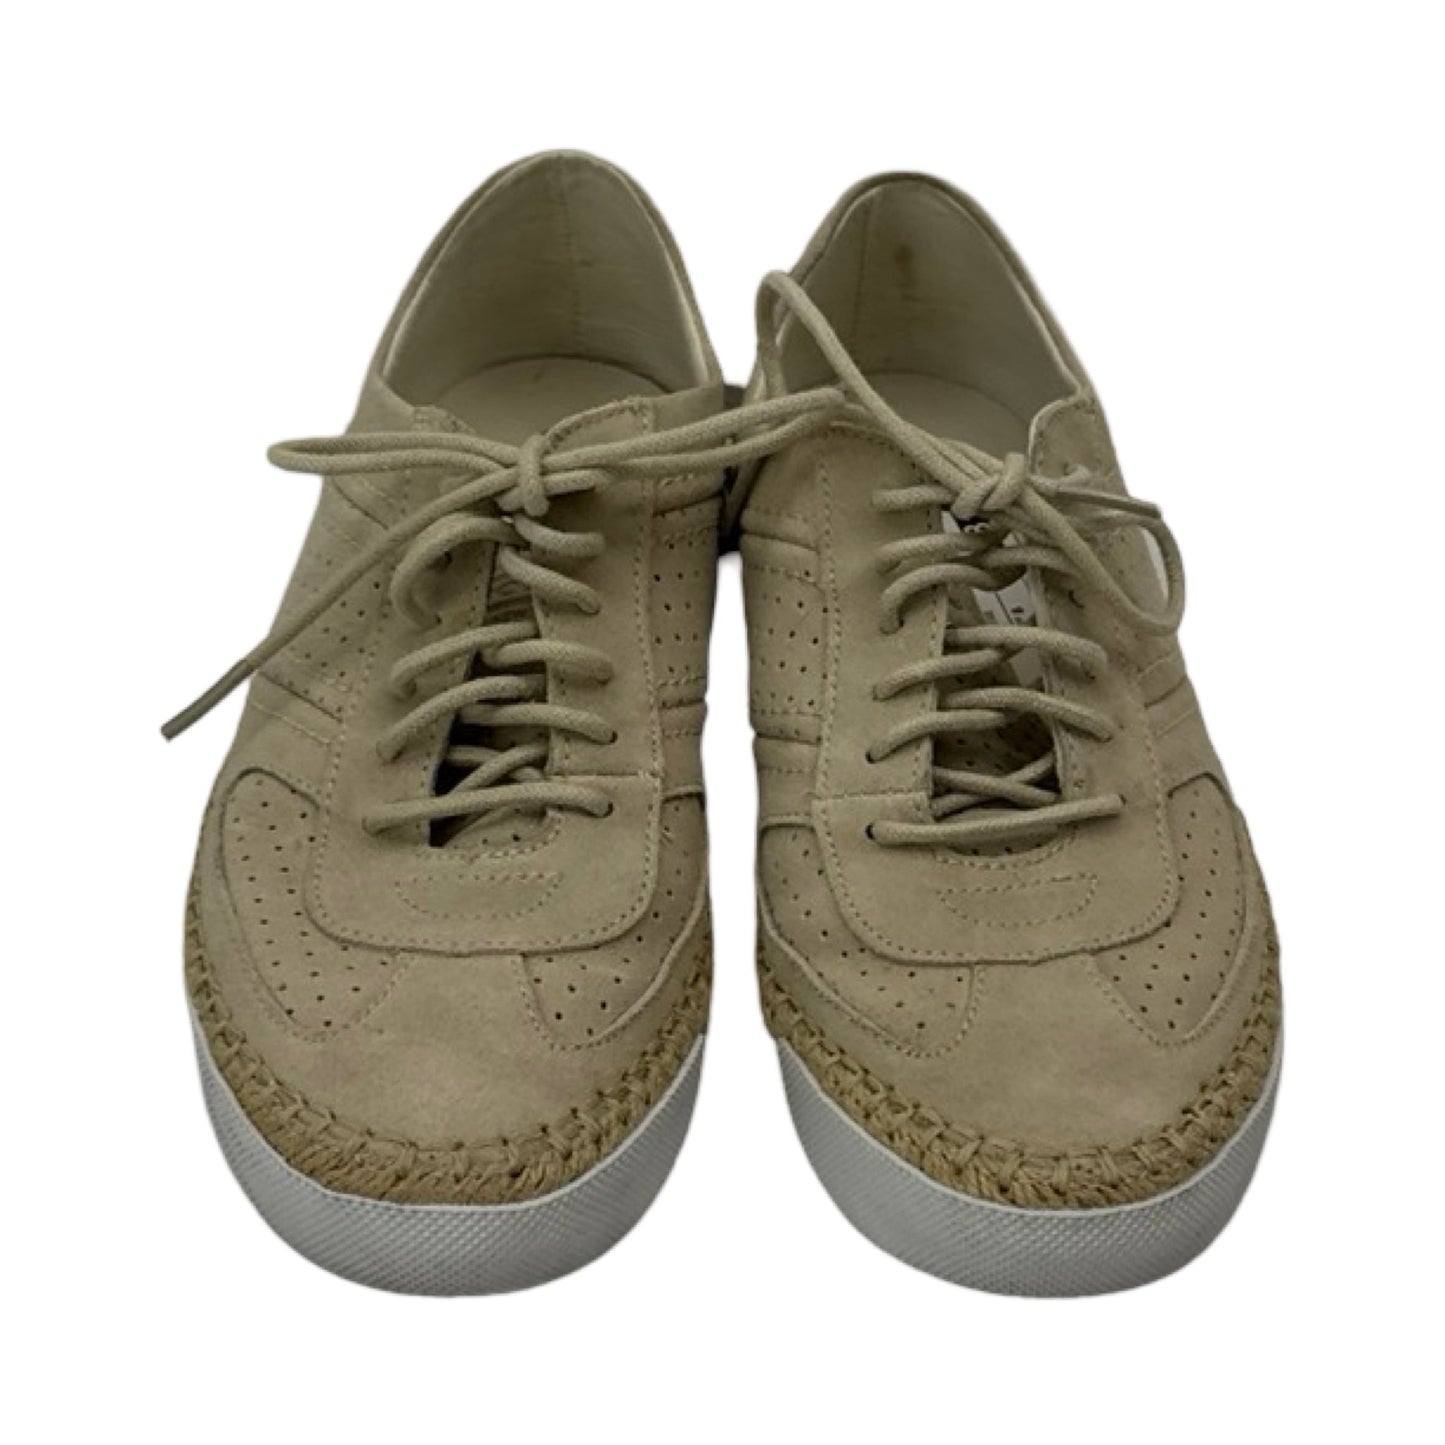 Beige Shoes Sneakers Coach, Size 8